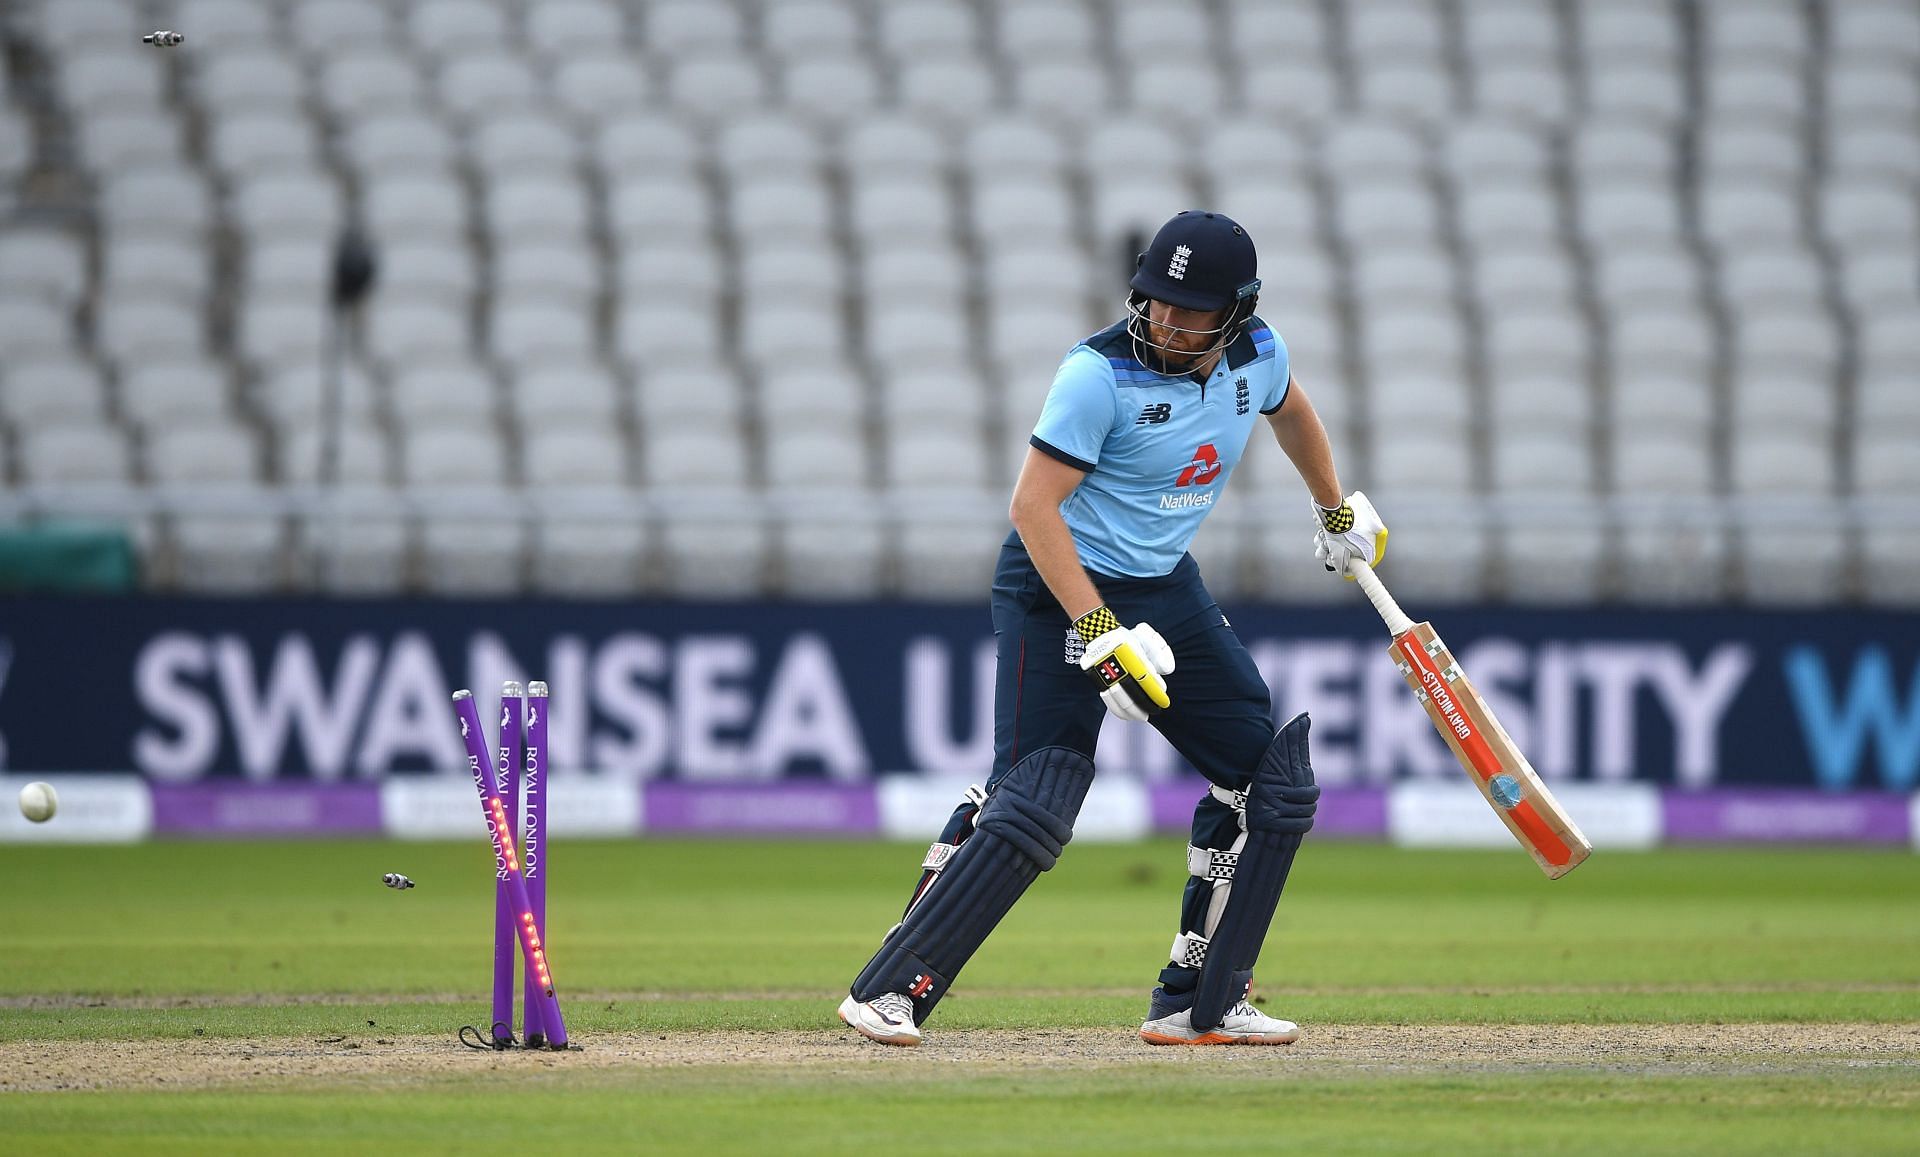 Jonny Bairstow will aim for big goals in tonight's match between Australia and England